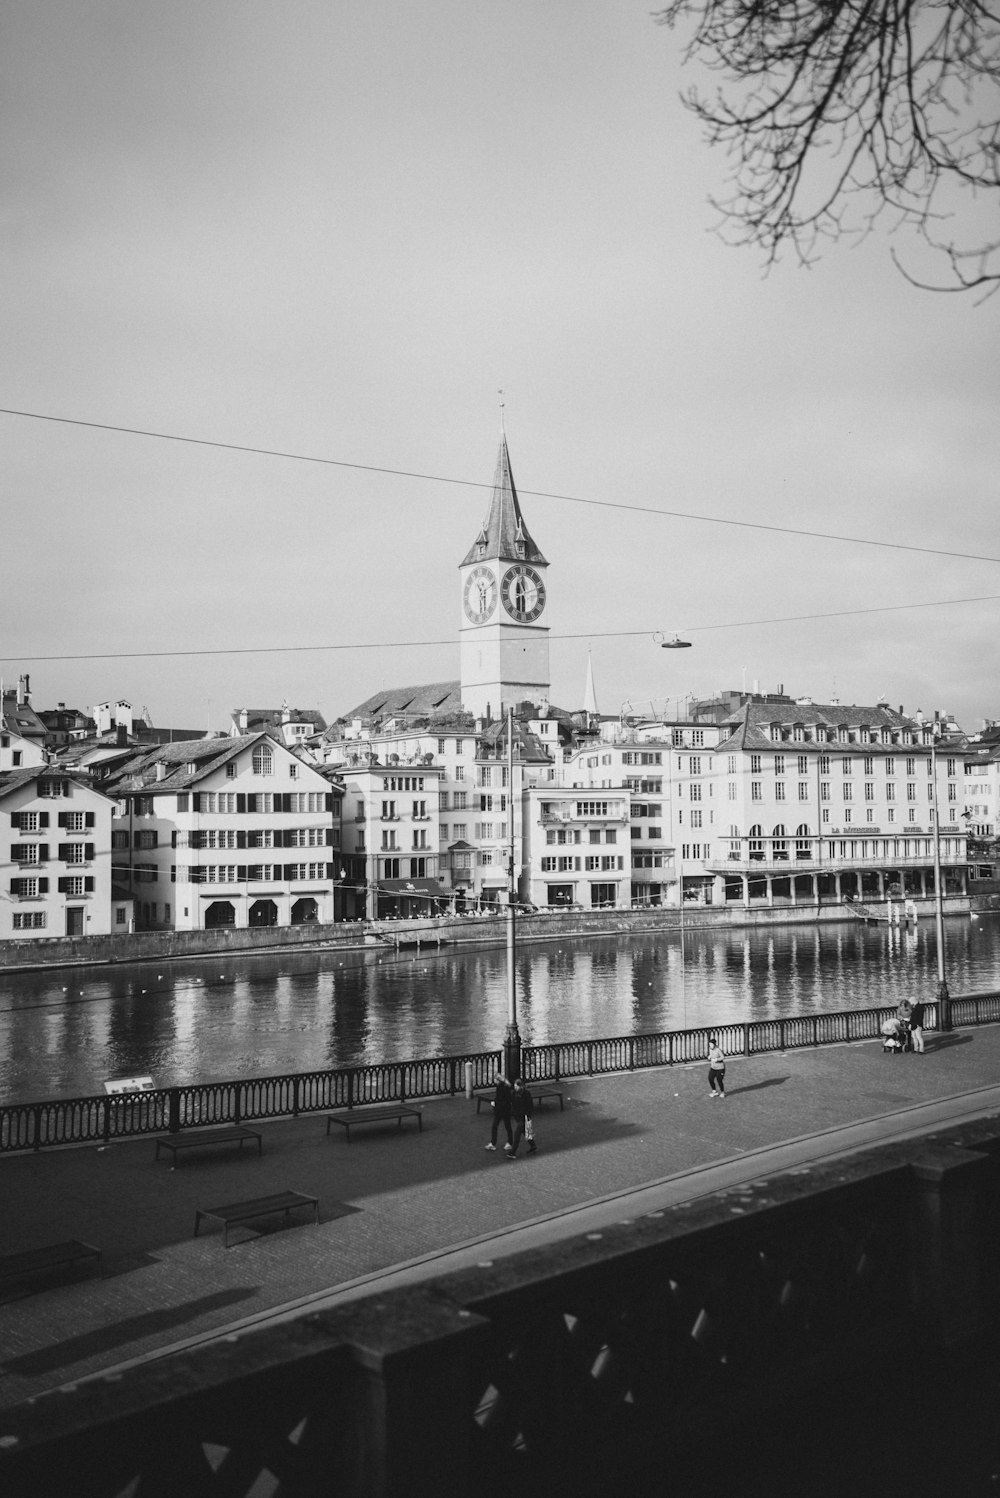 a black and white photo of a city with a clock tower